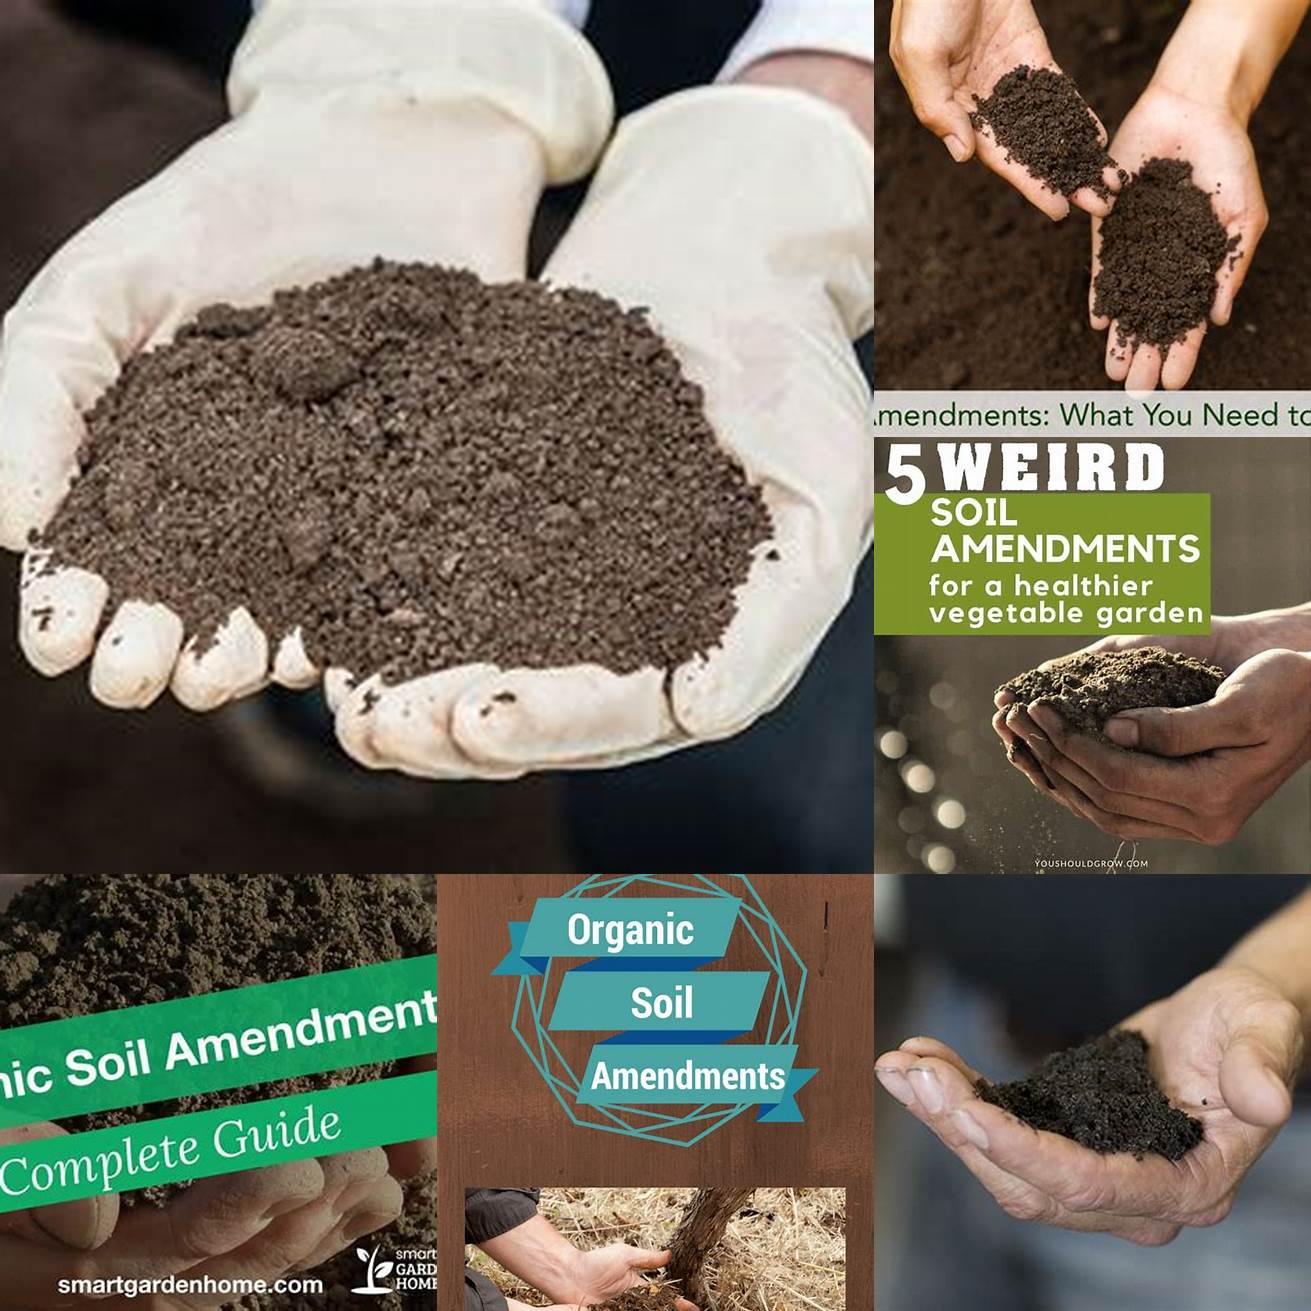 May require more frequent soil amendments